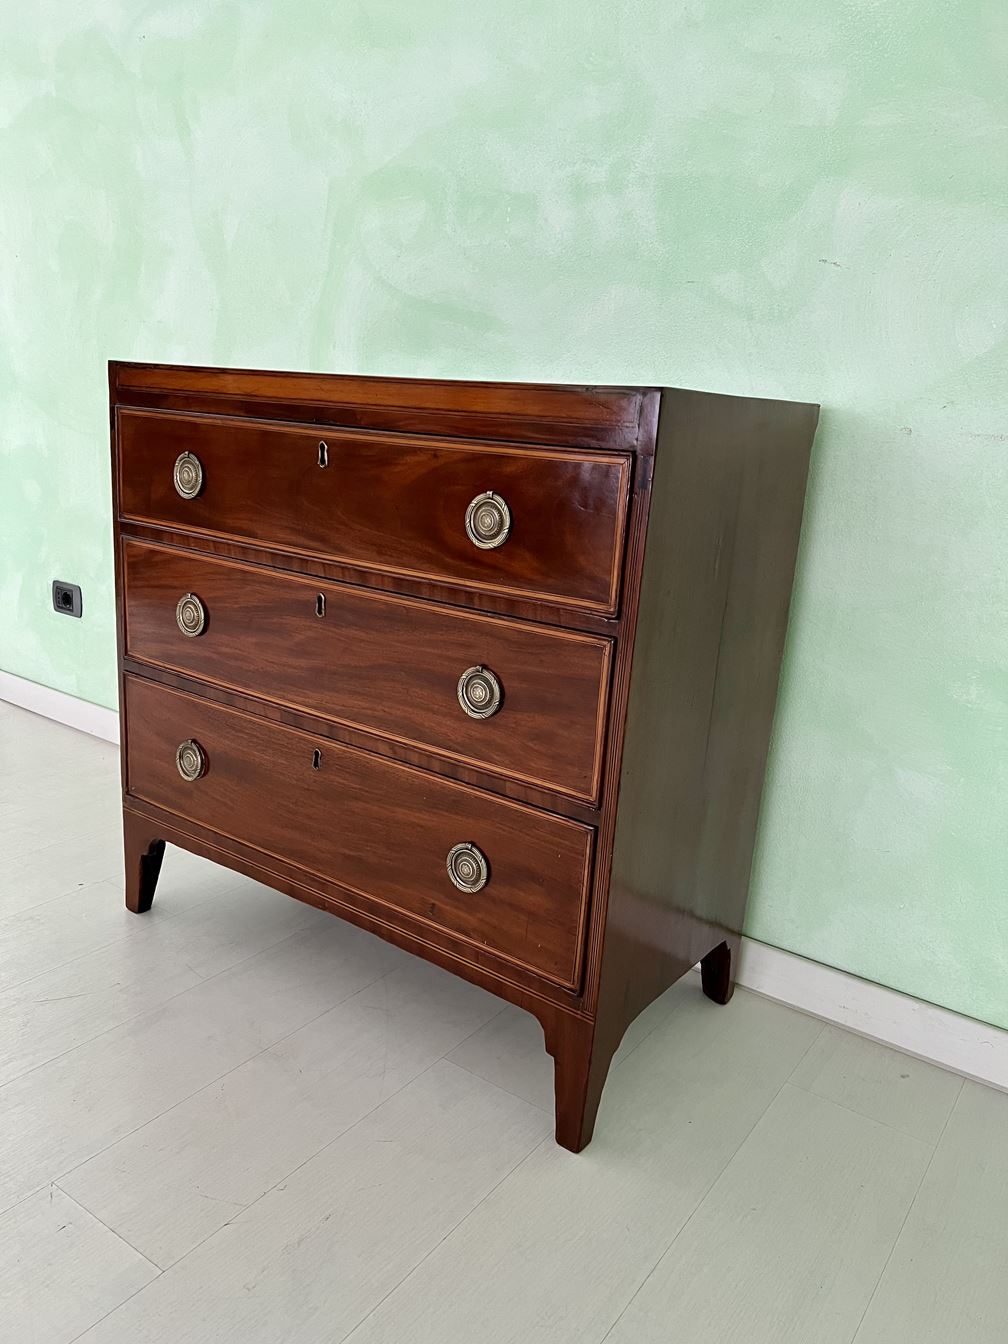 English Victorian chest of drawers in mahogany wood '800